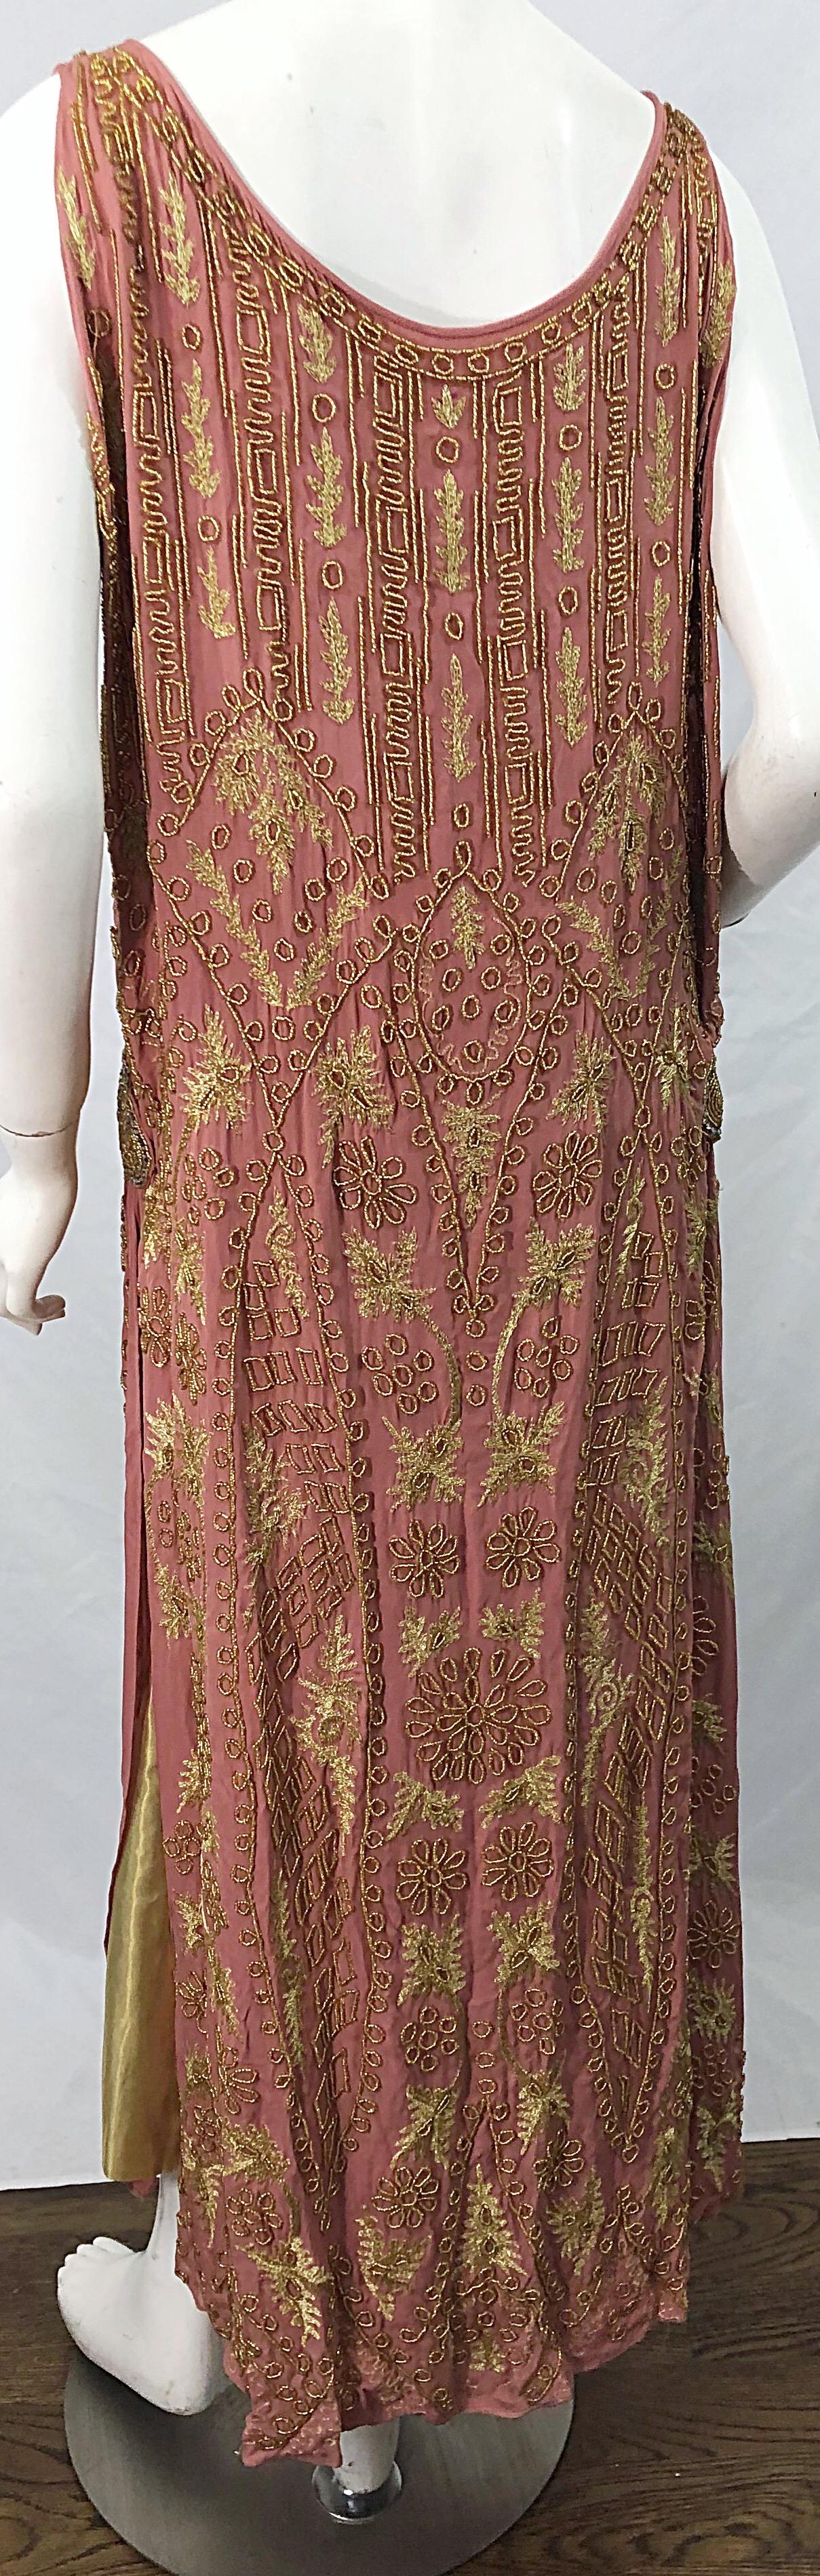 1920s French Couture Pink + Gold Beaded Gatsby Roaring 20s Vintage Flapper Dress 4